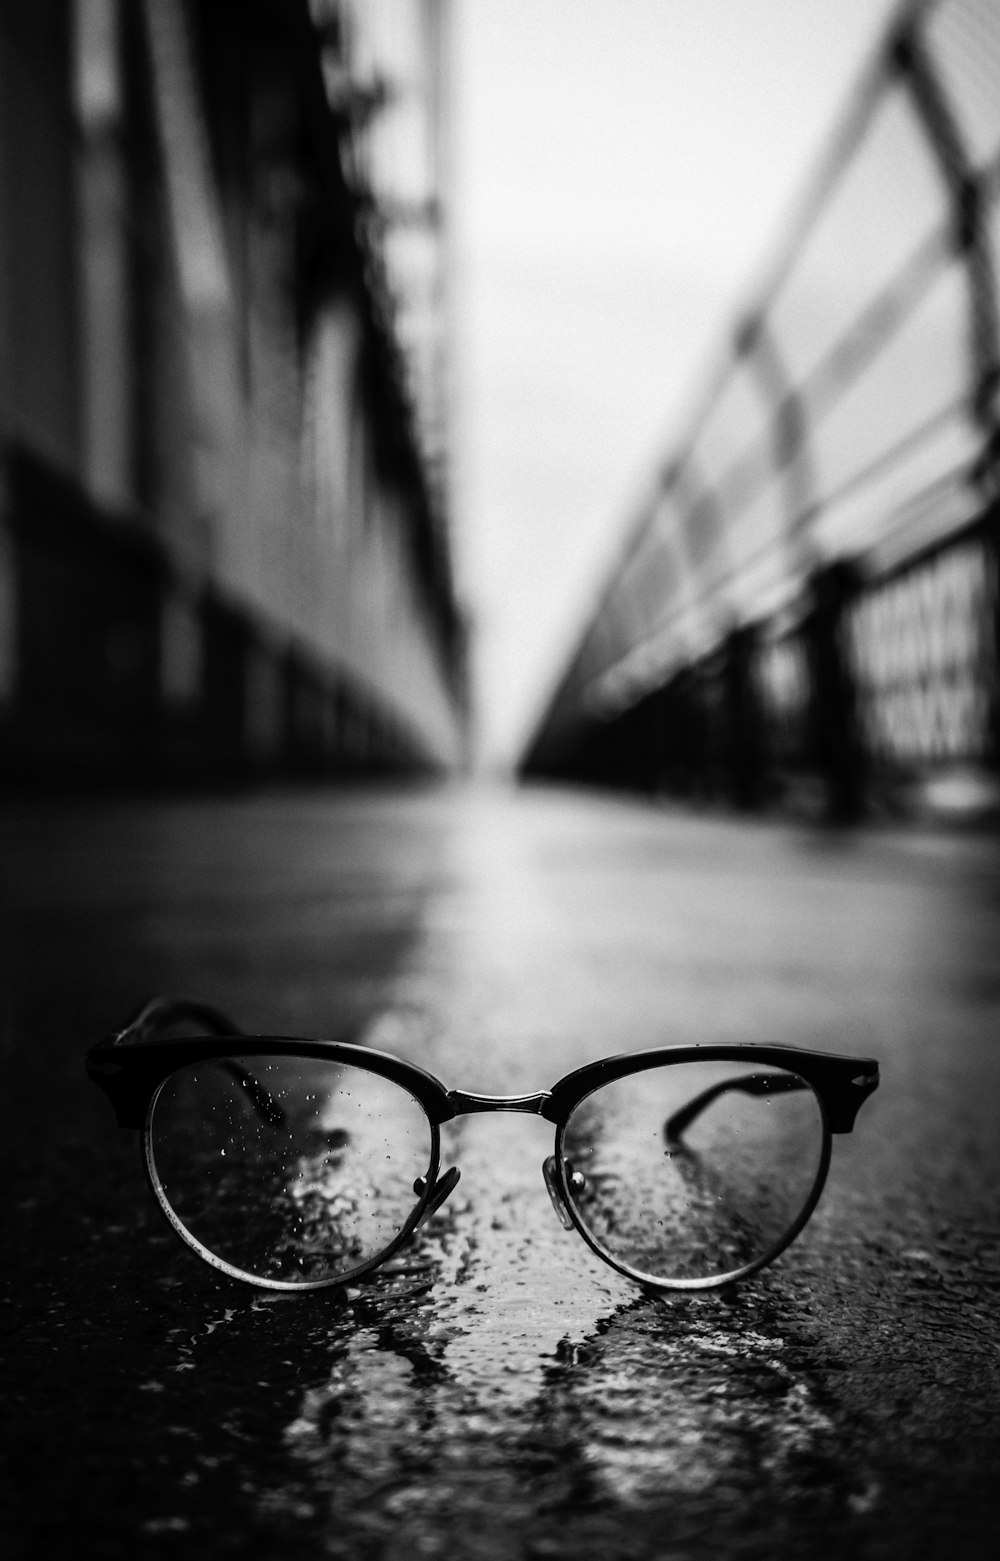 gray scale photography of Clubmaster-style sunglasses on road